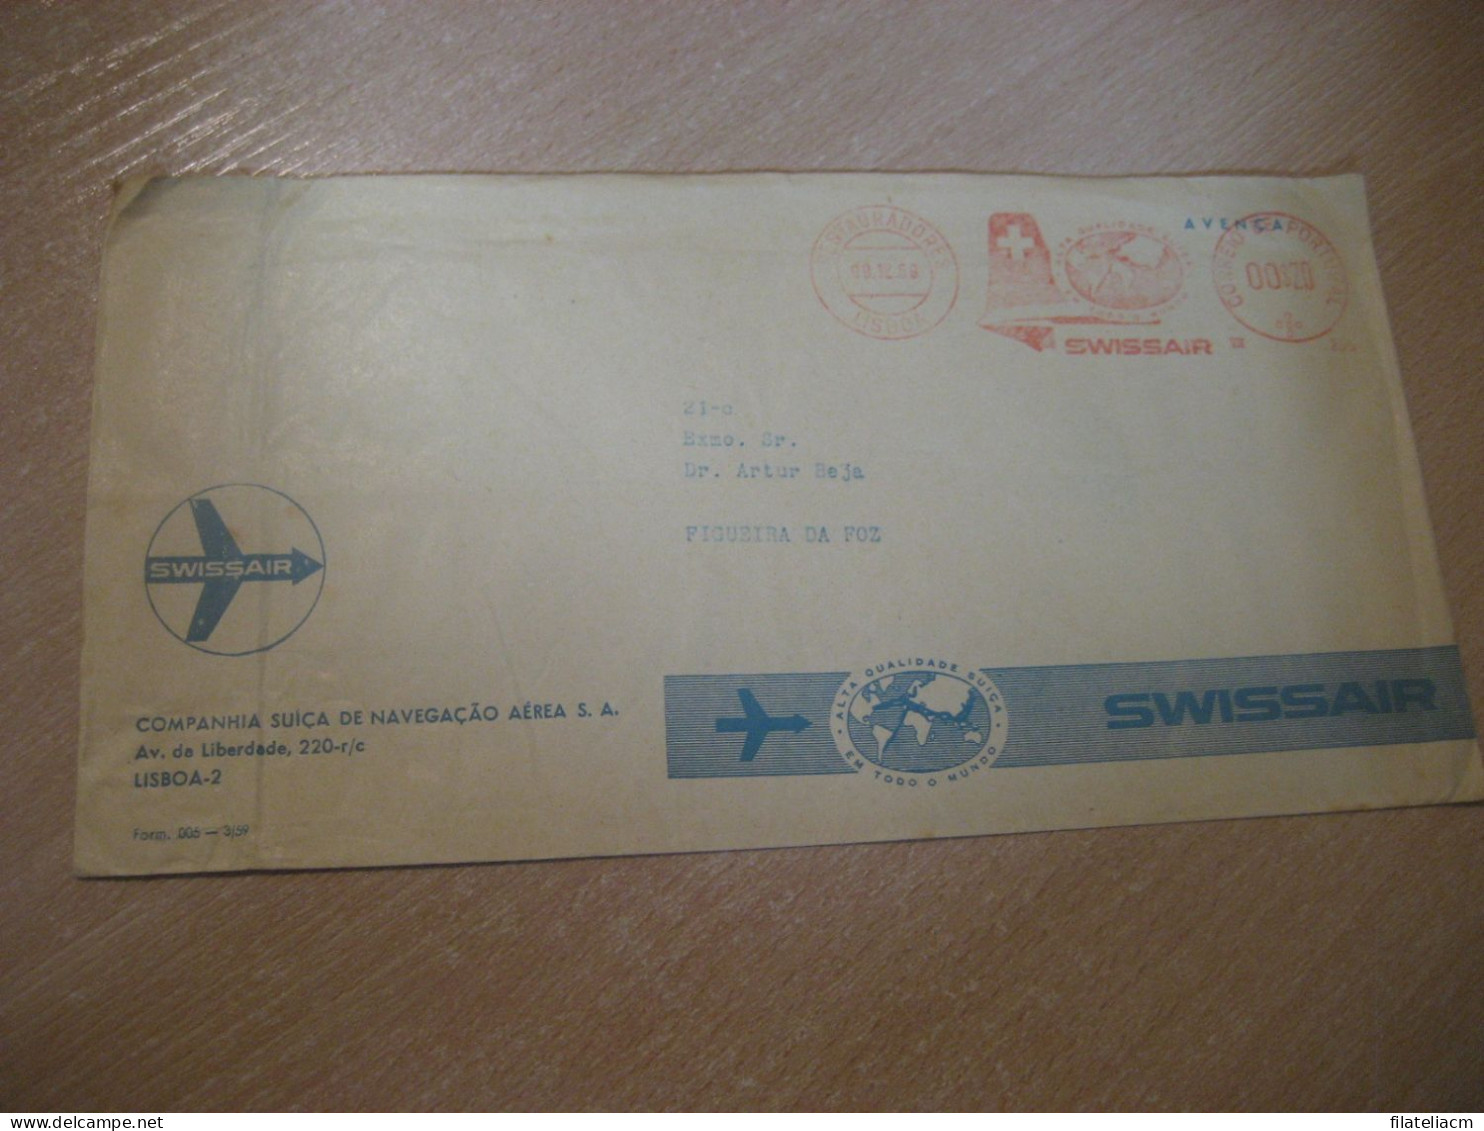 LISBOA 1959 To Figueira Da Foz SWISSAIR Airline Airlines Flight Meter Mail Cancel Cover PORTUGAL - Covers & Documents